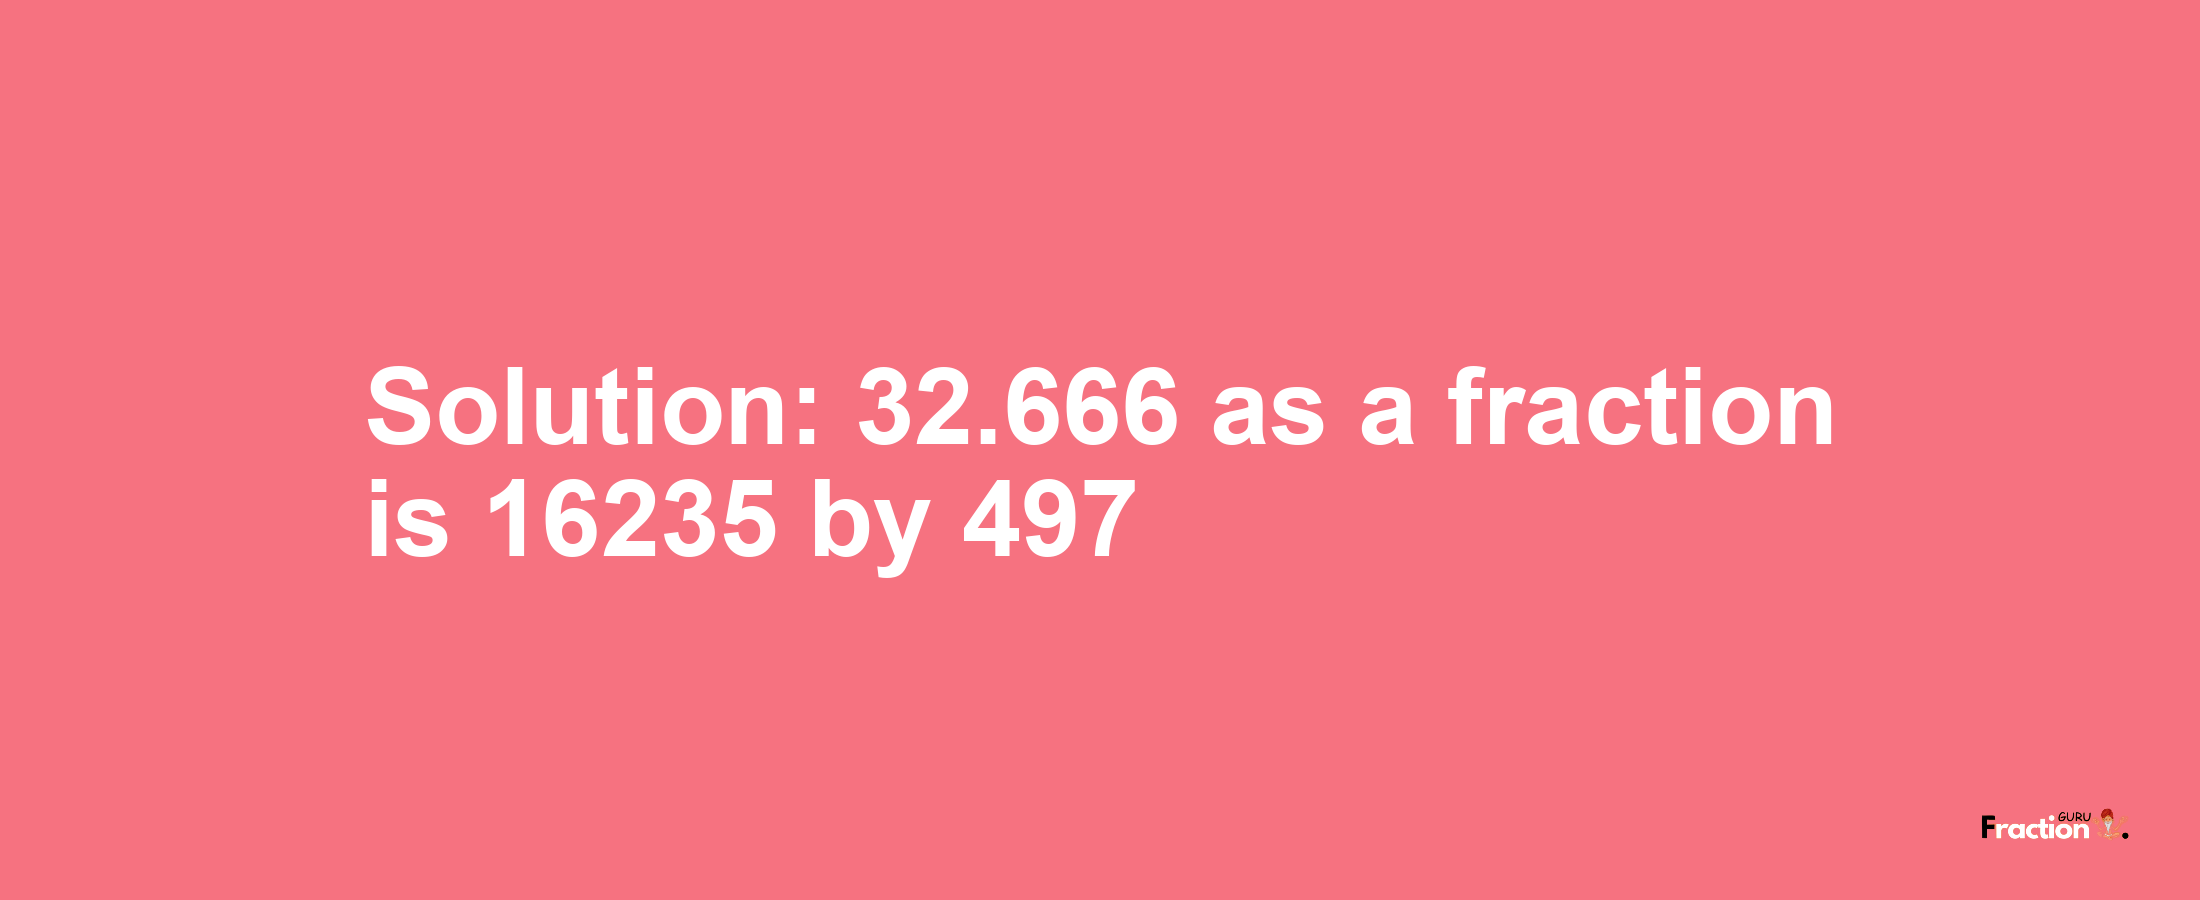 Solution:32.666 as a fraction is 16235/497